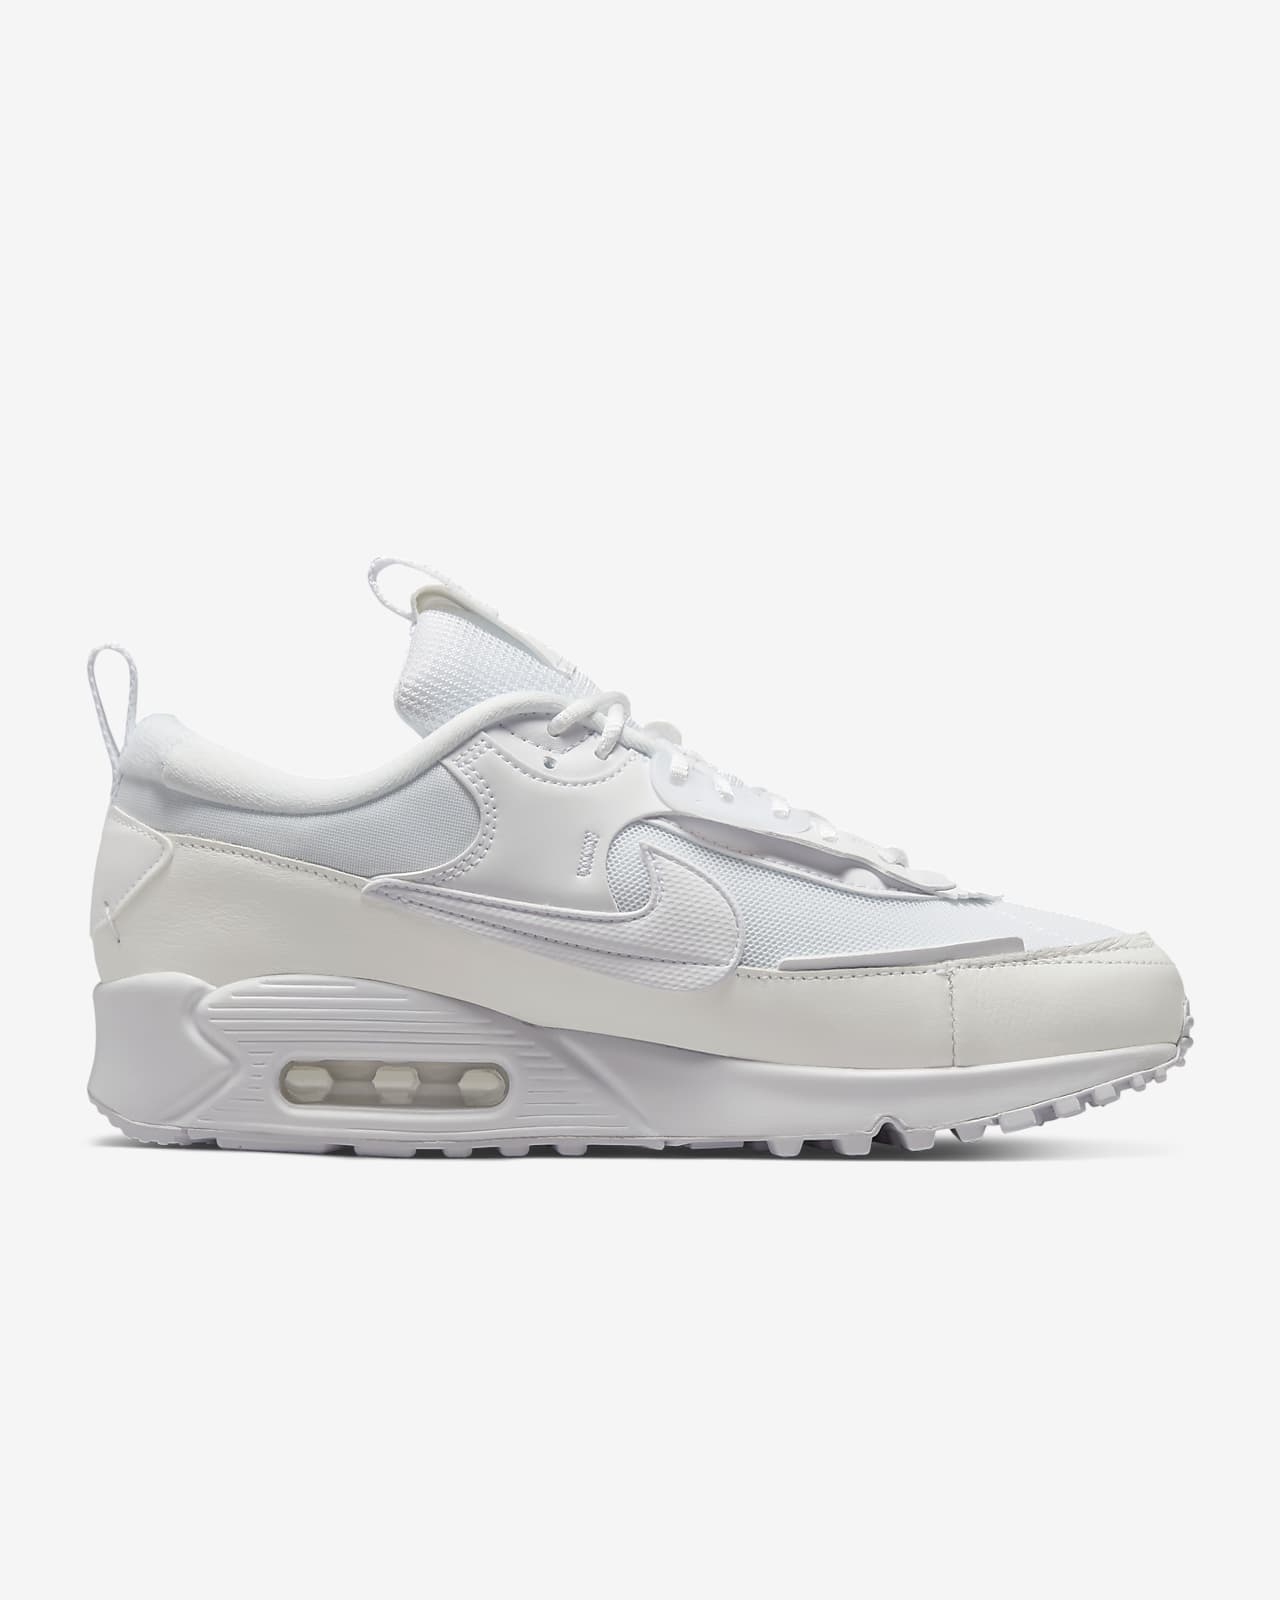 Nike Air Max 90 sneakers in off white and silver